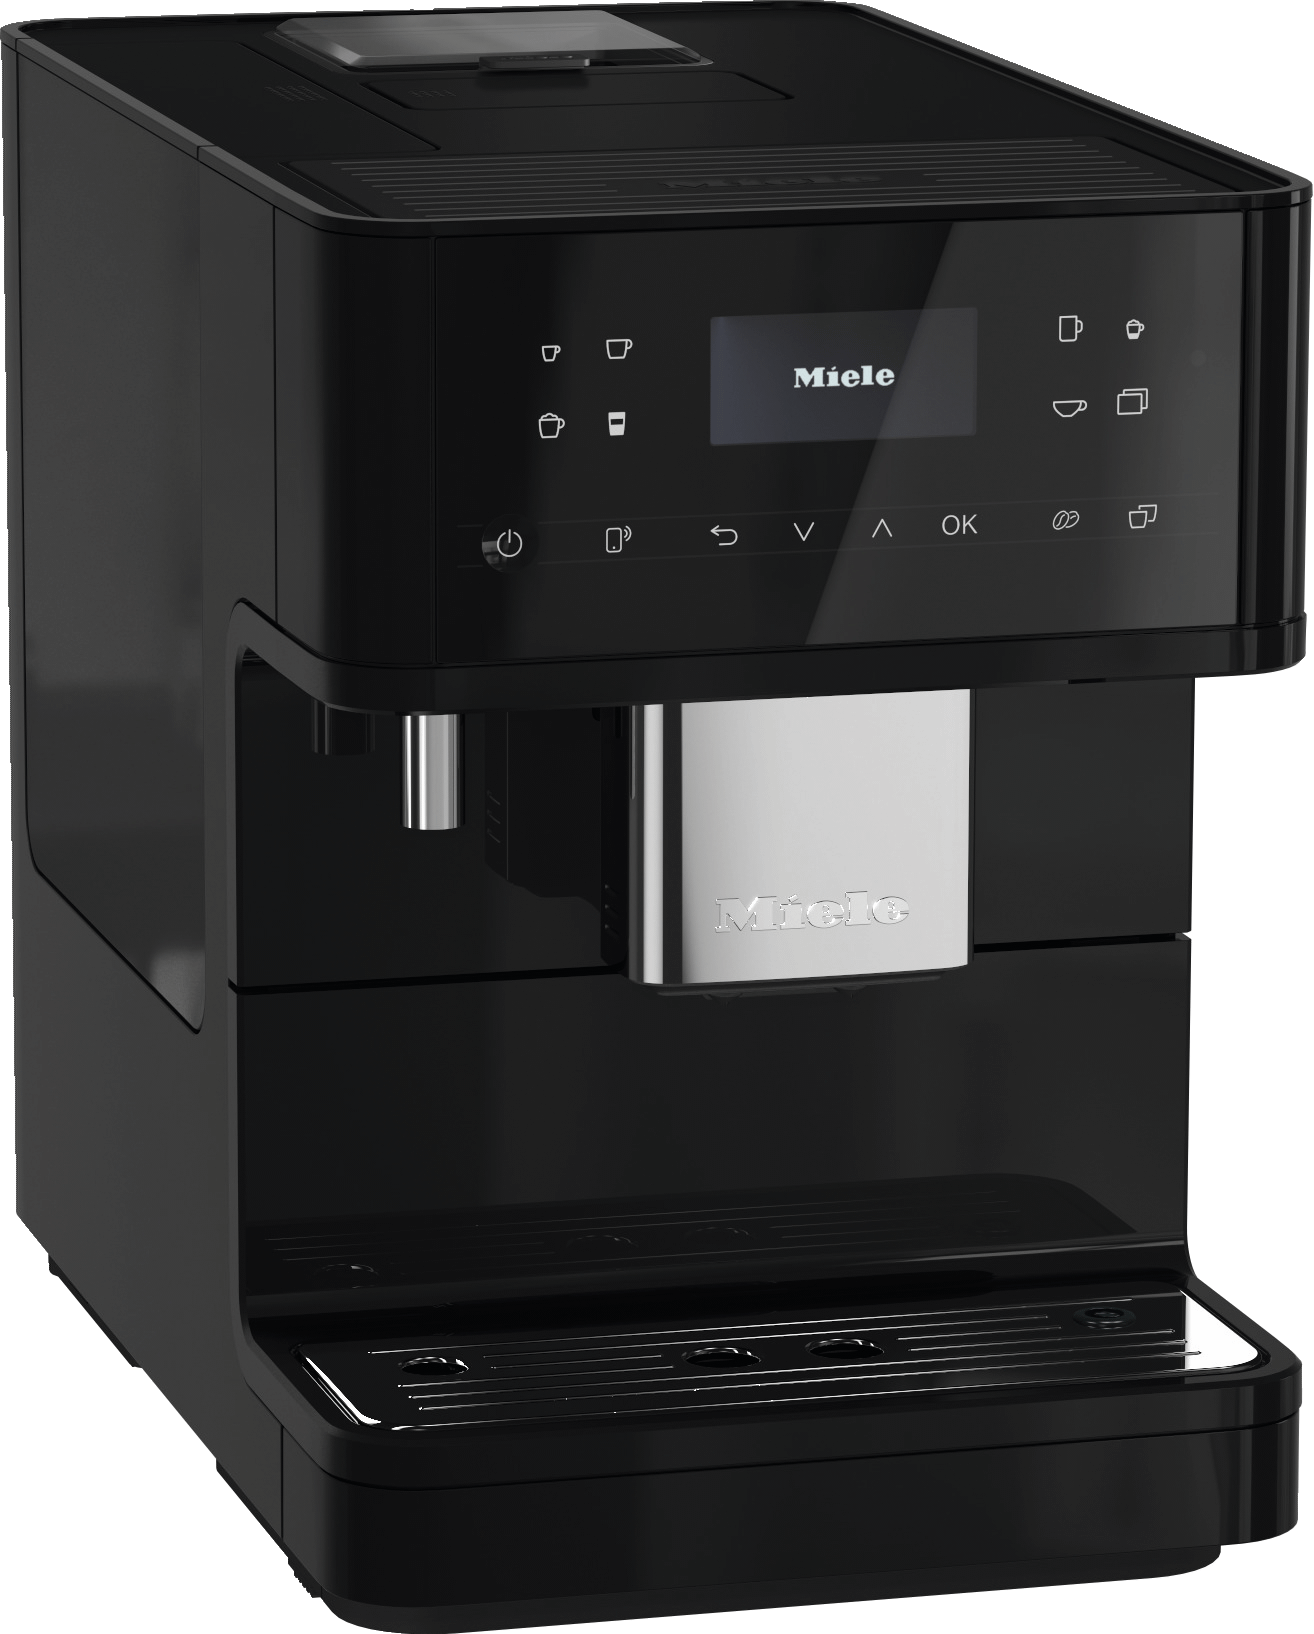 Miele CM6160 MILK PERFECTION BLACK   Countertop Coffee Machine With Wifi Conn@Ct And A Wide Selection Of Specialty Coffees For Maximum Freedom.